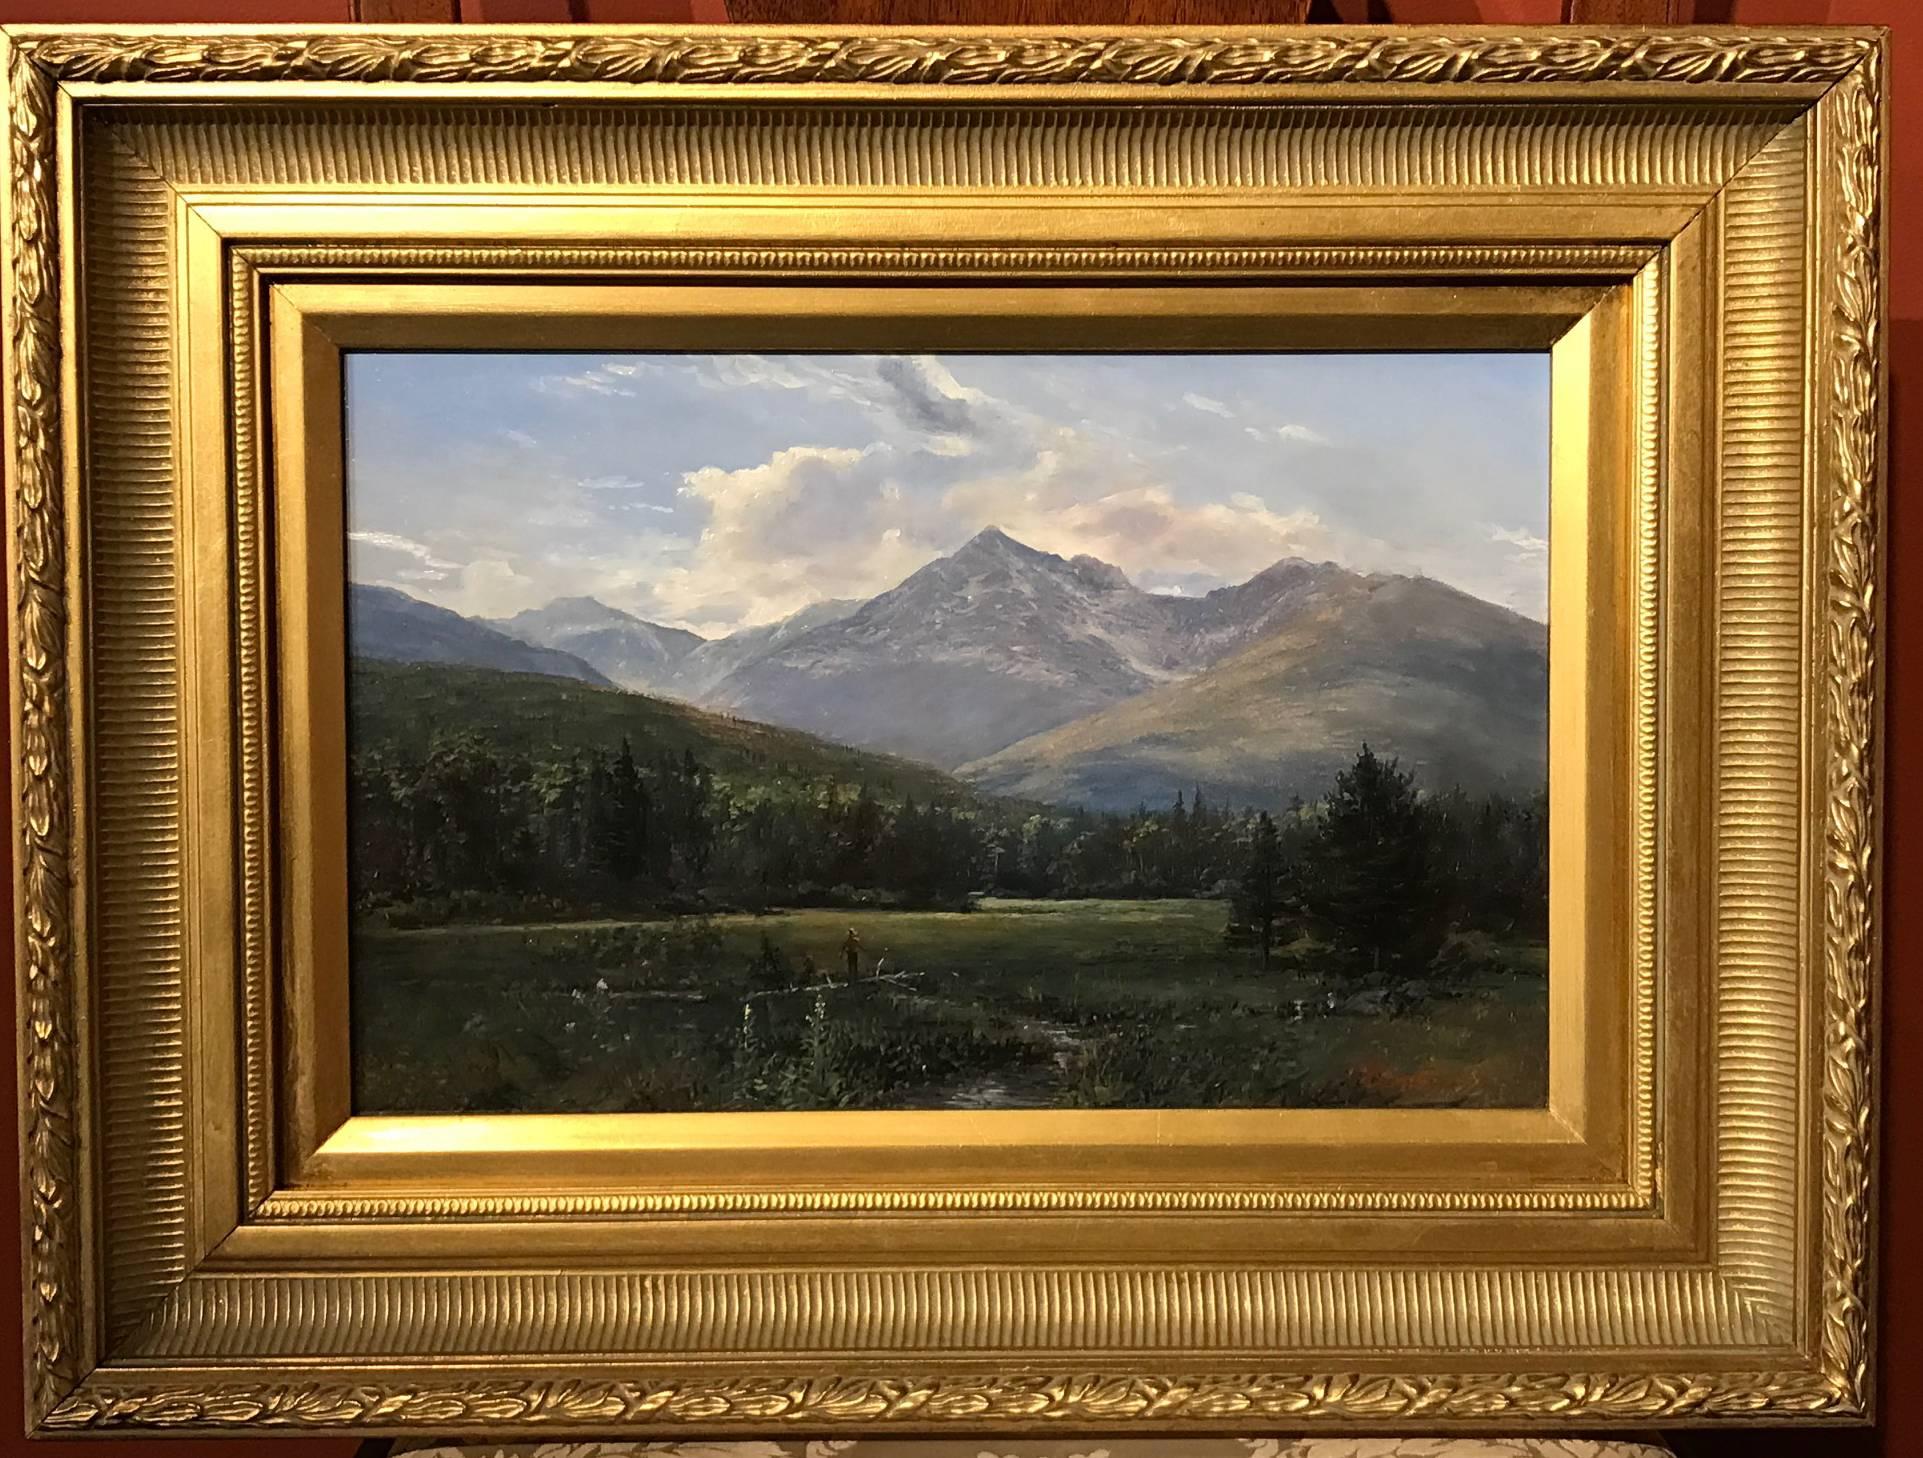 This beautiful New Hampshire White Mountain landscape painting of Mount Adams in the presidential range was done by contemporary American artist Erik Koeppel (1980-). Koeppel was born in Oregon and later moved to the White Mountains of New